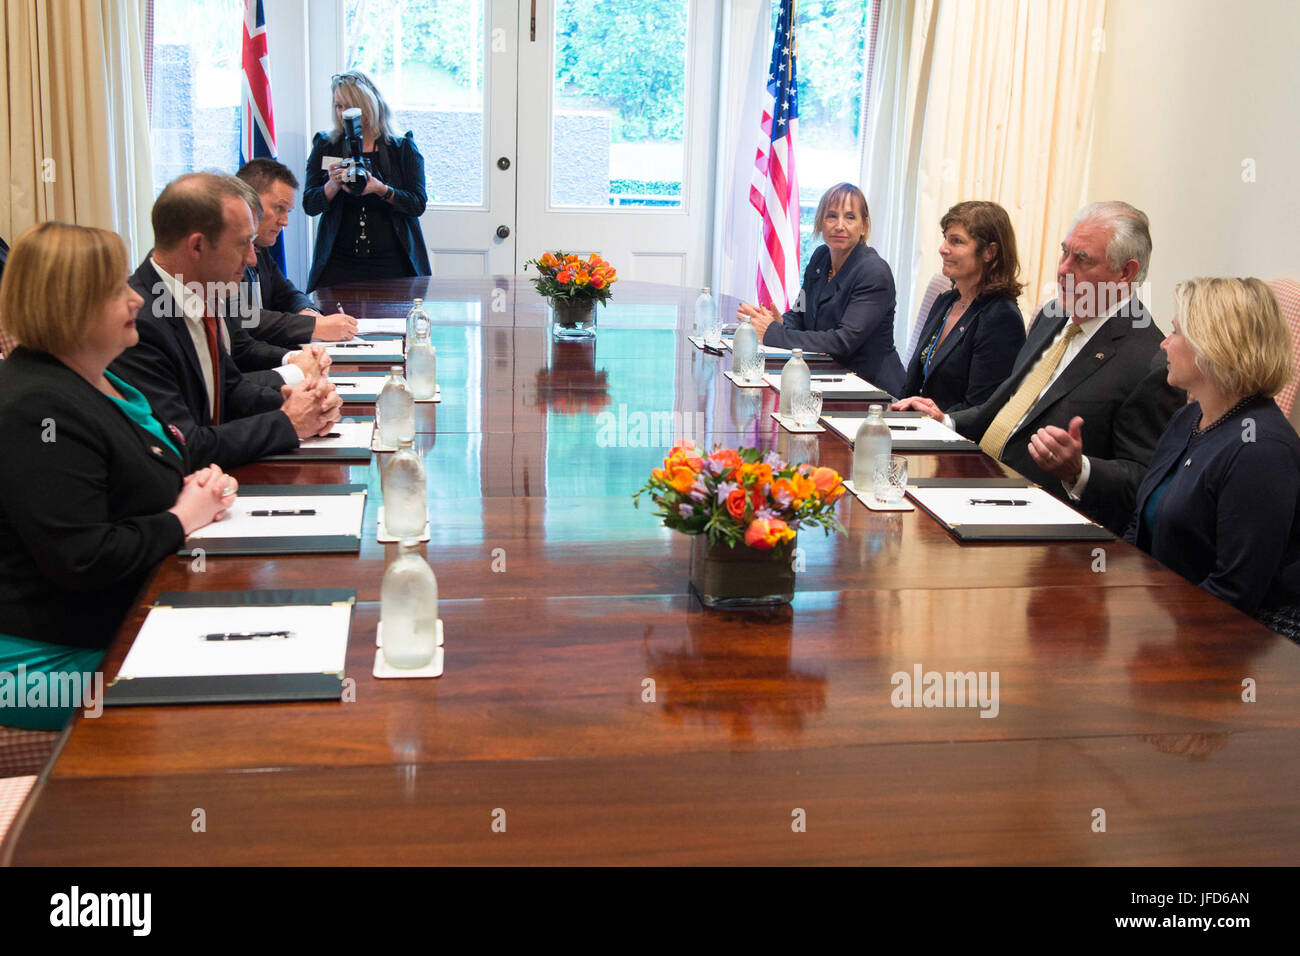 U.S. Secretary of State Rex Tillerson meets with the Leader of the New Zealand Labour Party, Andrew Little, in Wellington, New Zealand, on June 6, 2017. Stock Photo